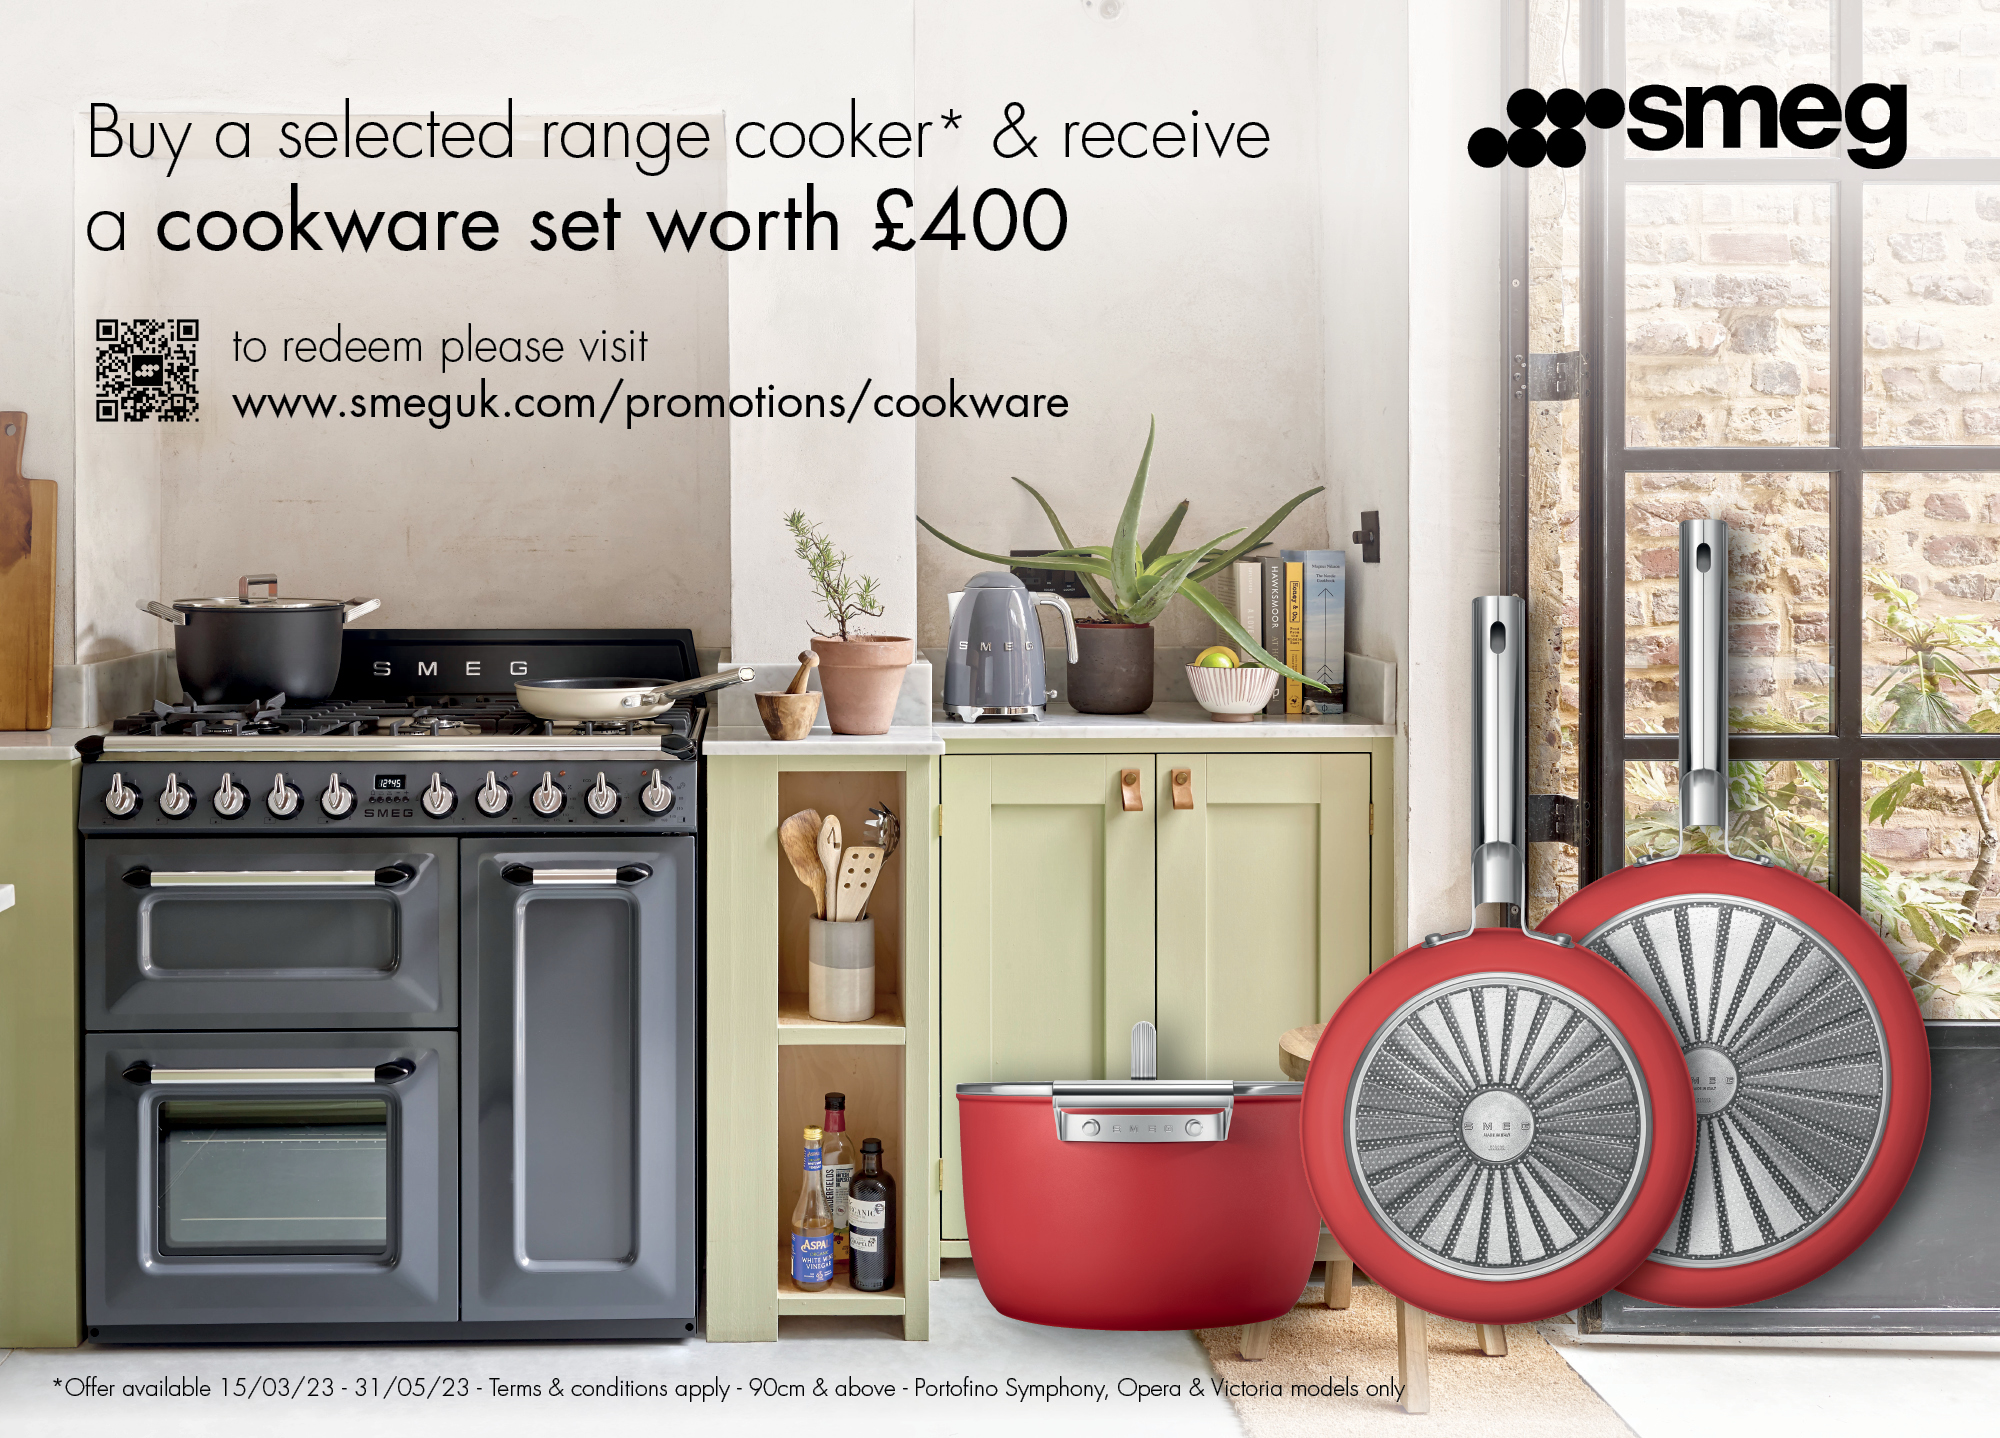 Smeg - Buy a selected range cooker and recieve cookware worth £400